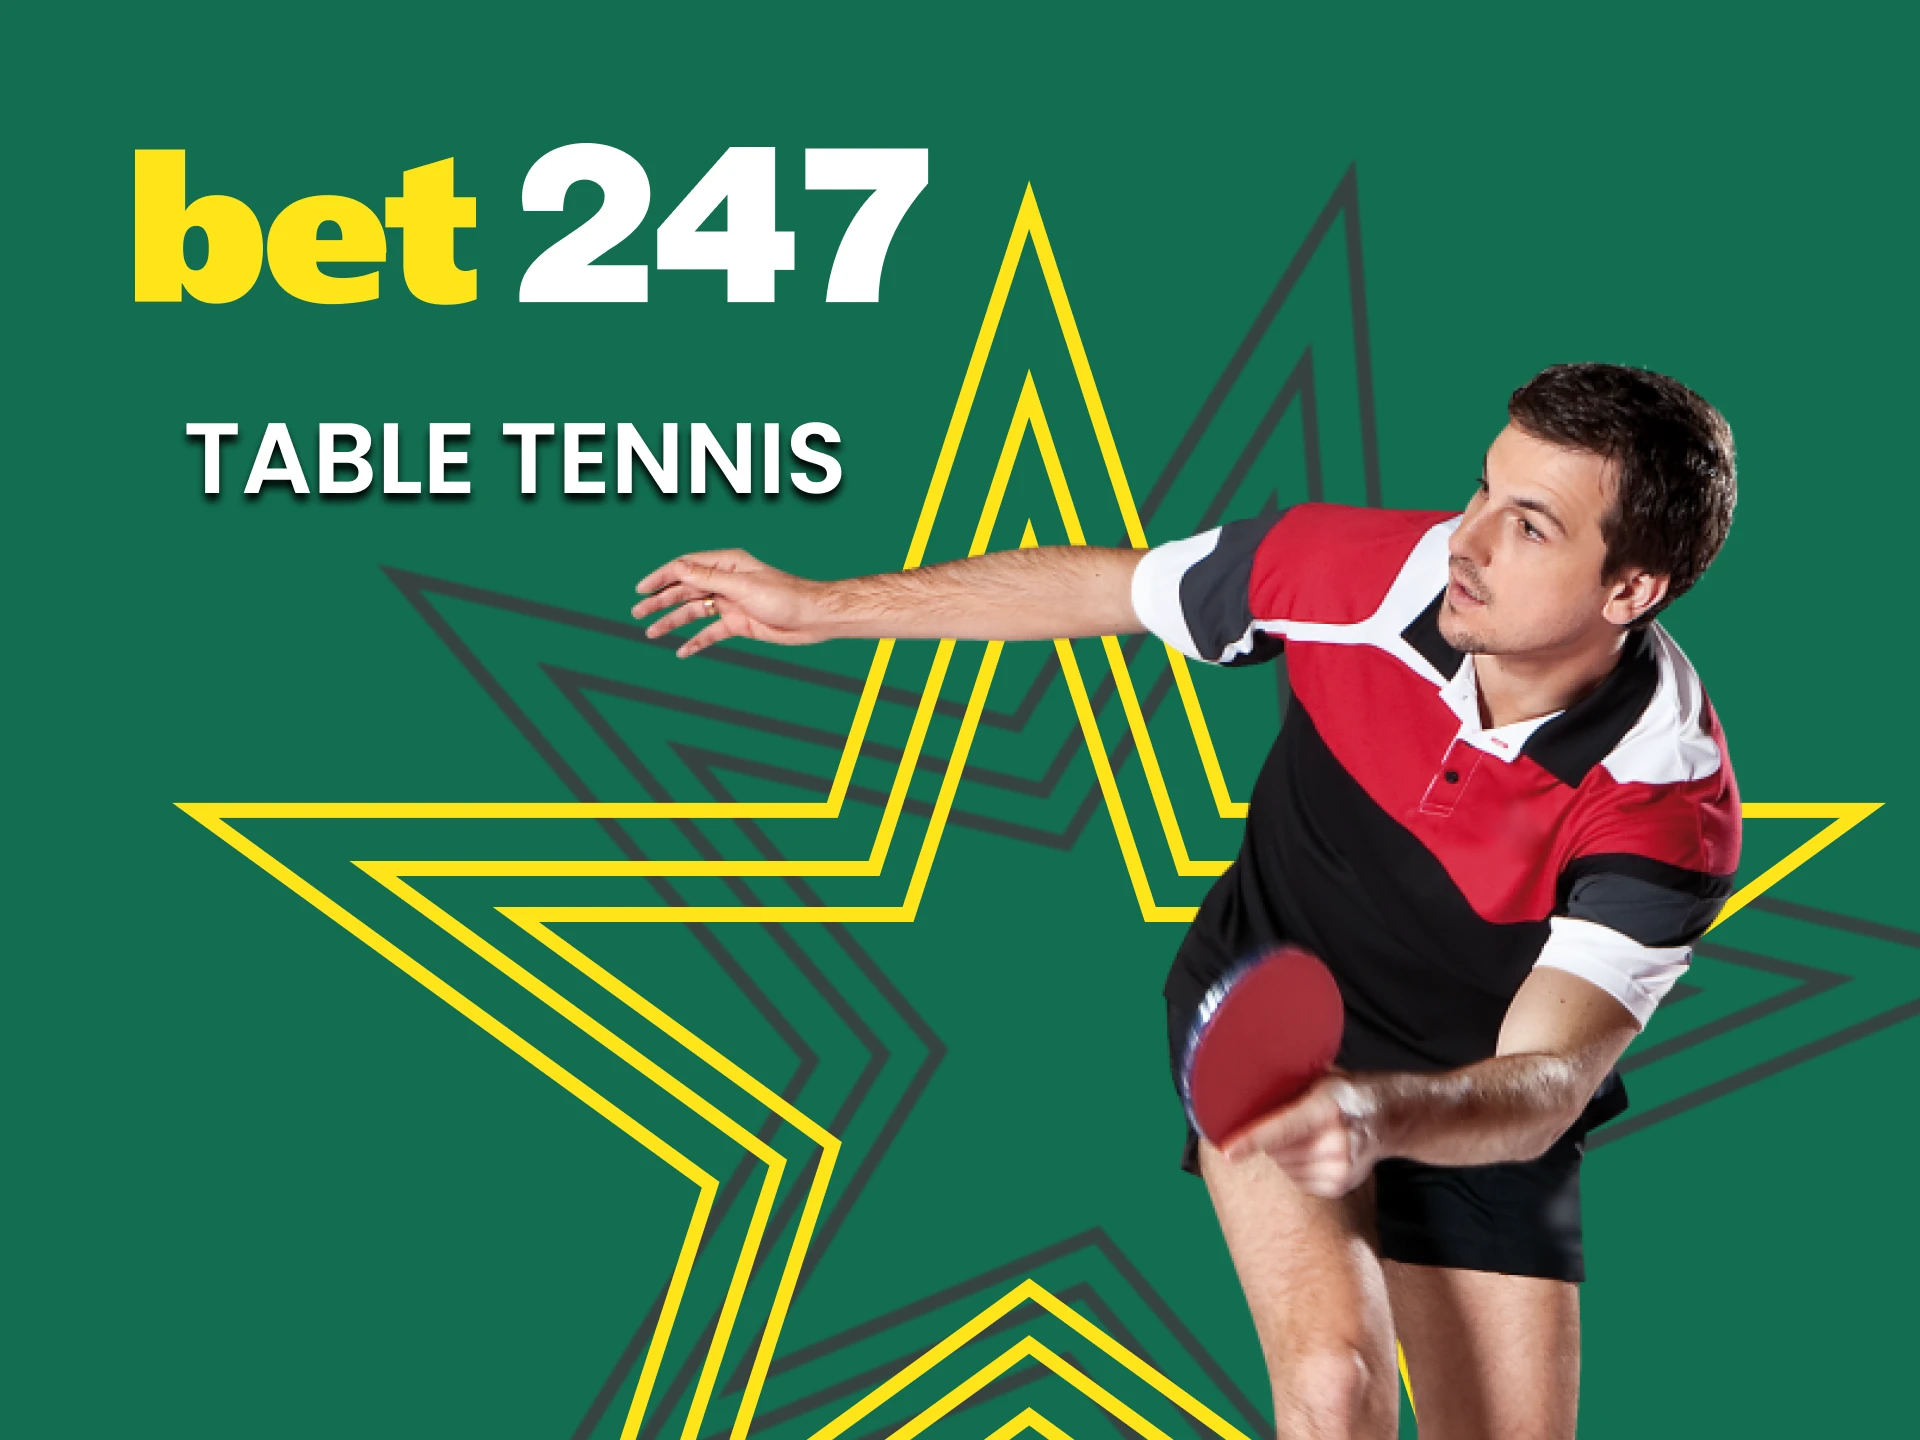 At Bet247 you can bet on table tennis.